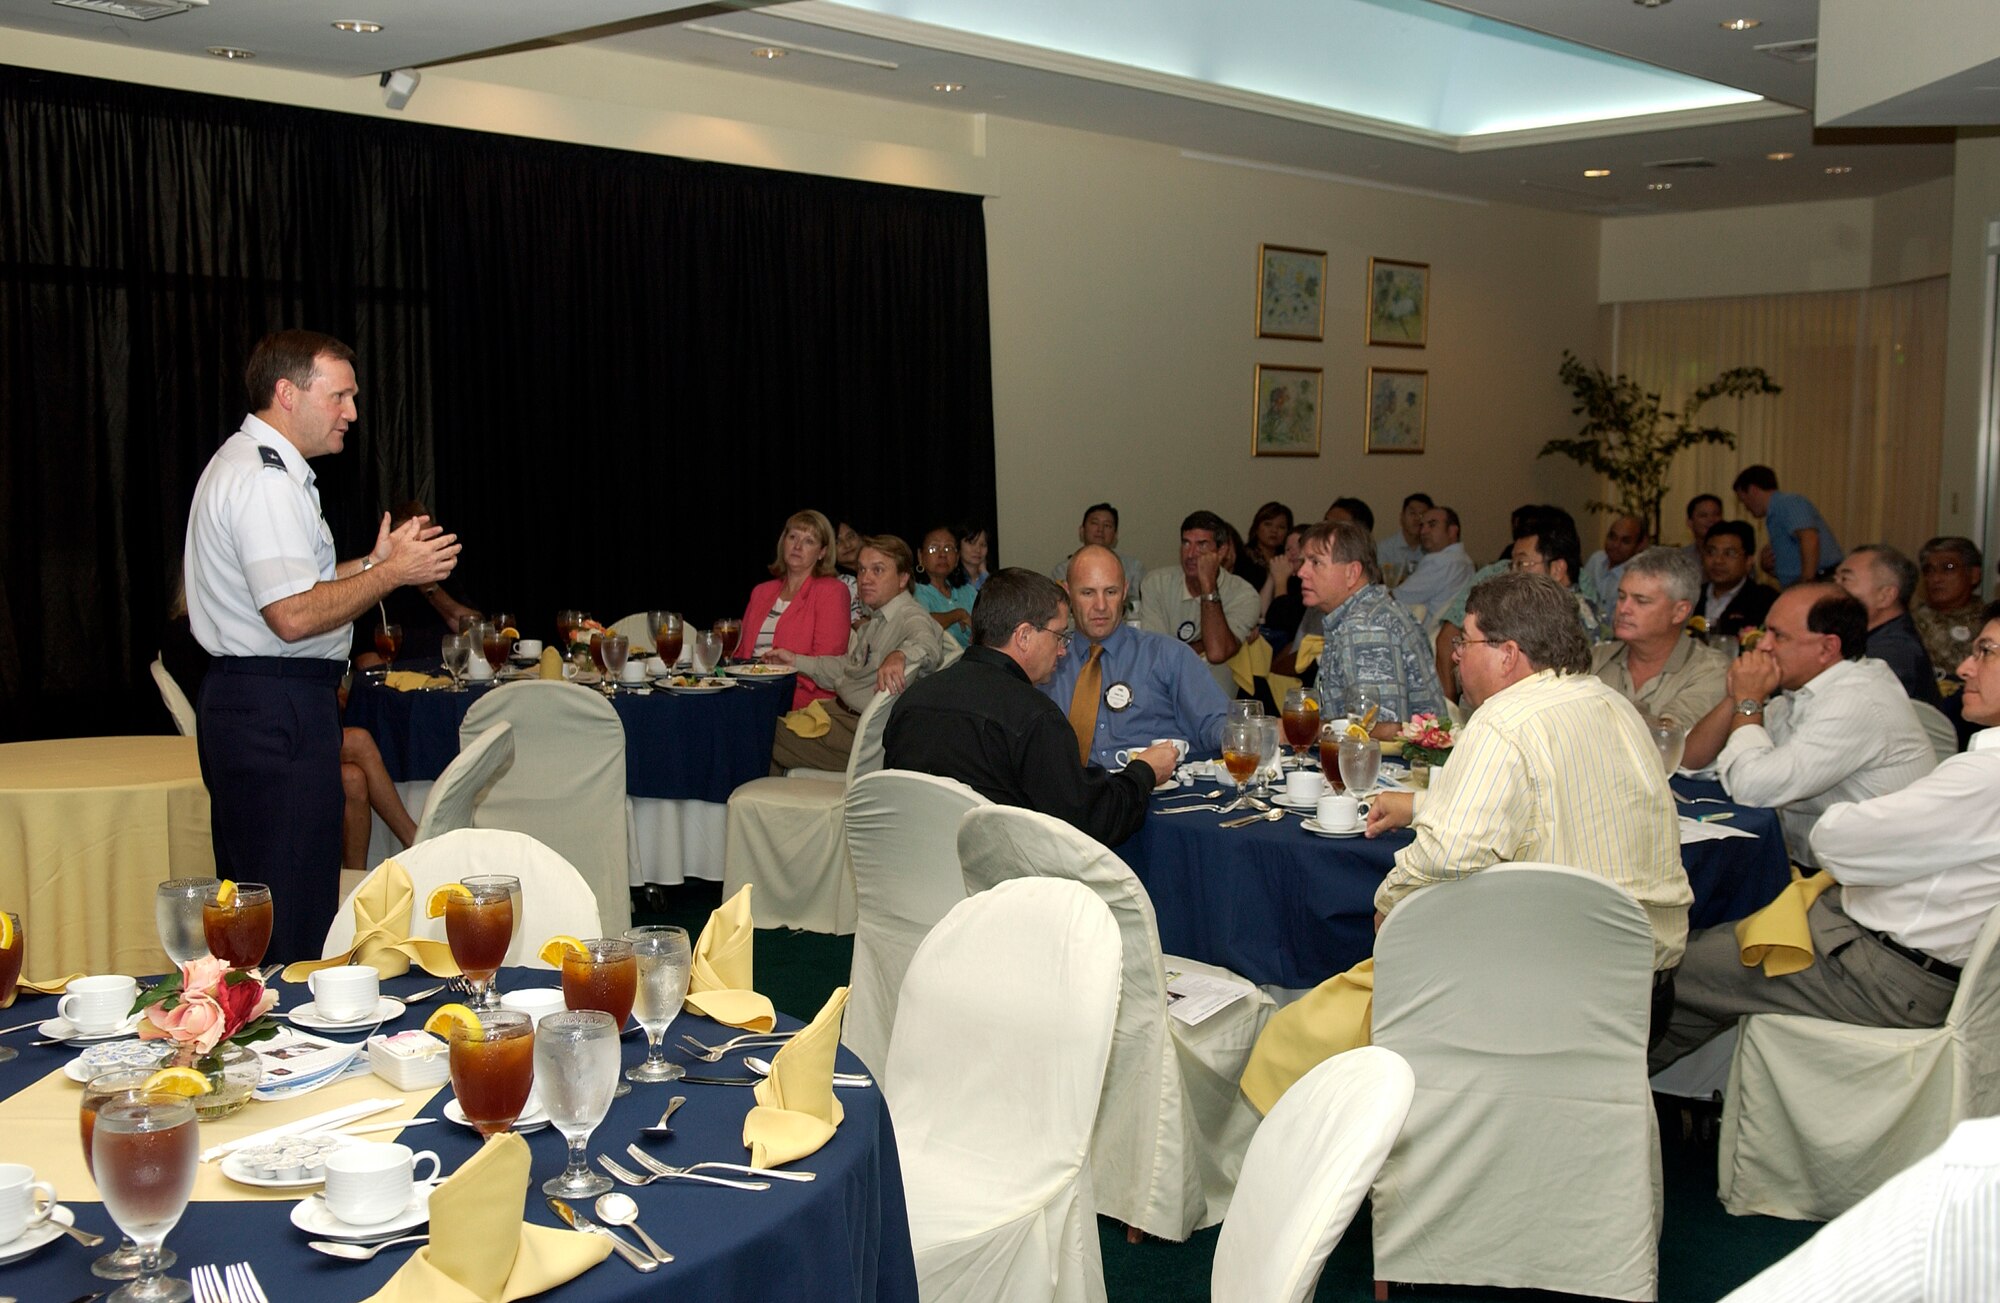 ANDERSEN AFB, GUAM---Brigadier General Douglas H. Owens, Commander, 36th Wing, speaks to members of the Rotary Club of Tumon Bay on September 25th, 2007.  General Owens attended the meeting as a guest speaker. (U.S. Air Force photo by Senior Airman Miranda Moorer)(RELEASED)                                     